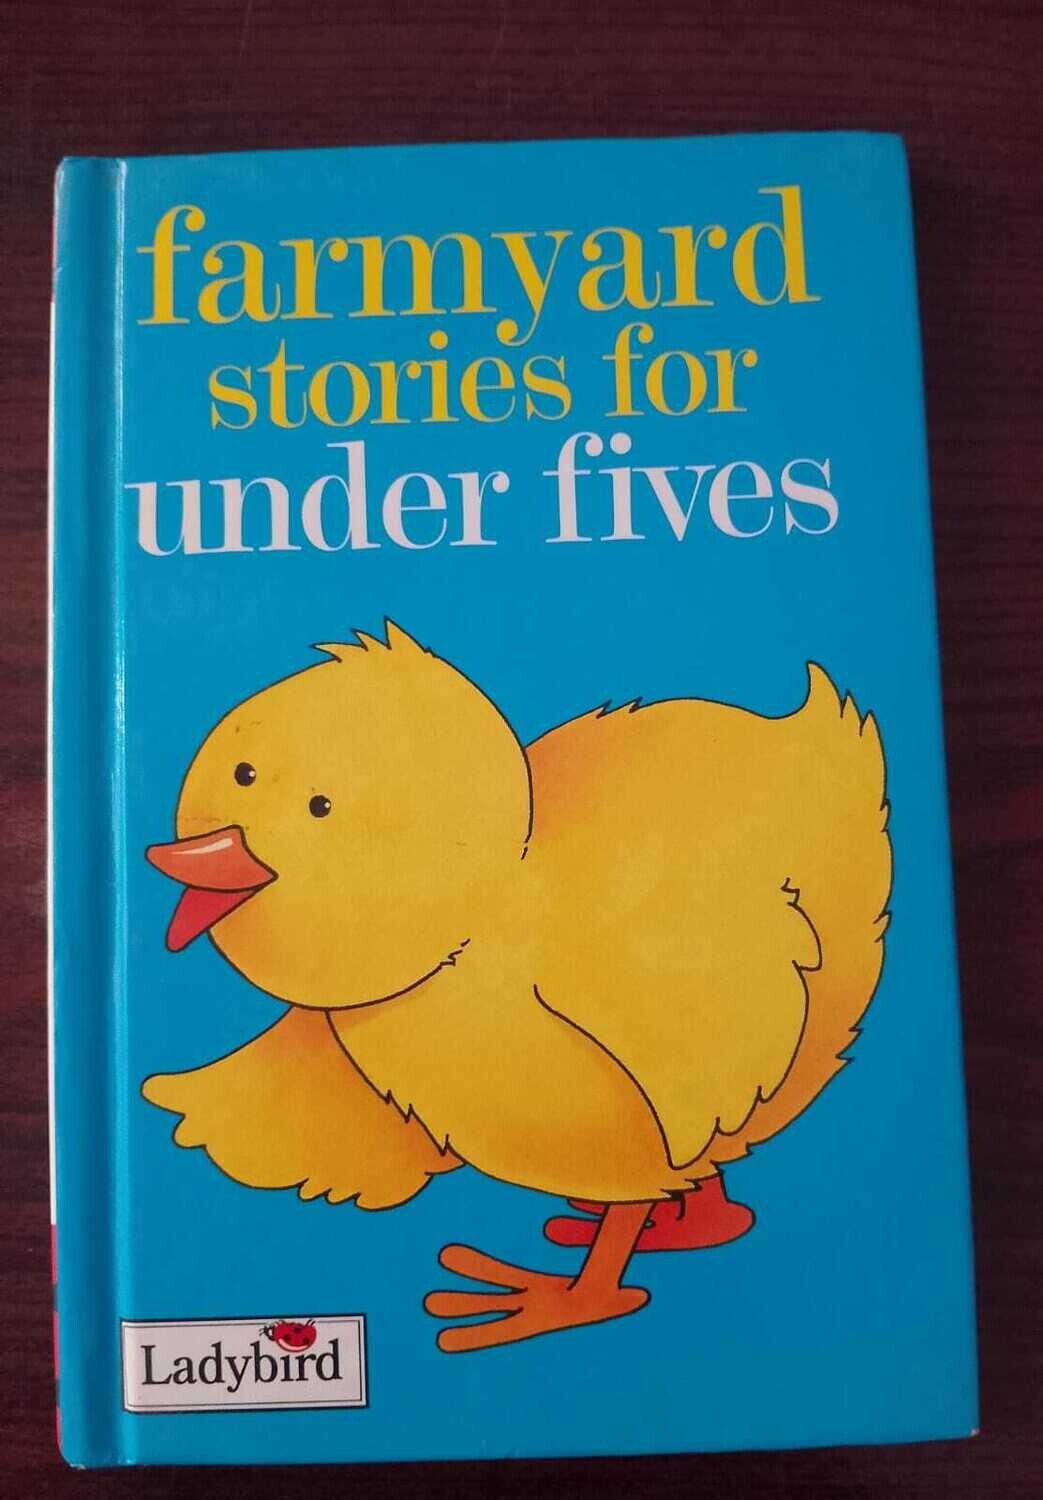 Farmyard stories for under fives